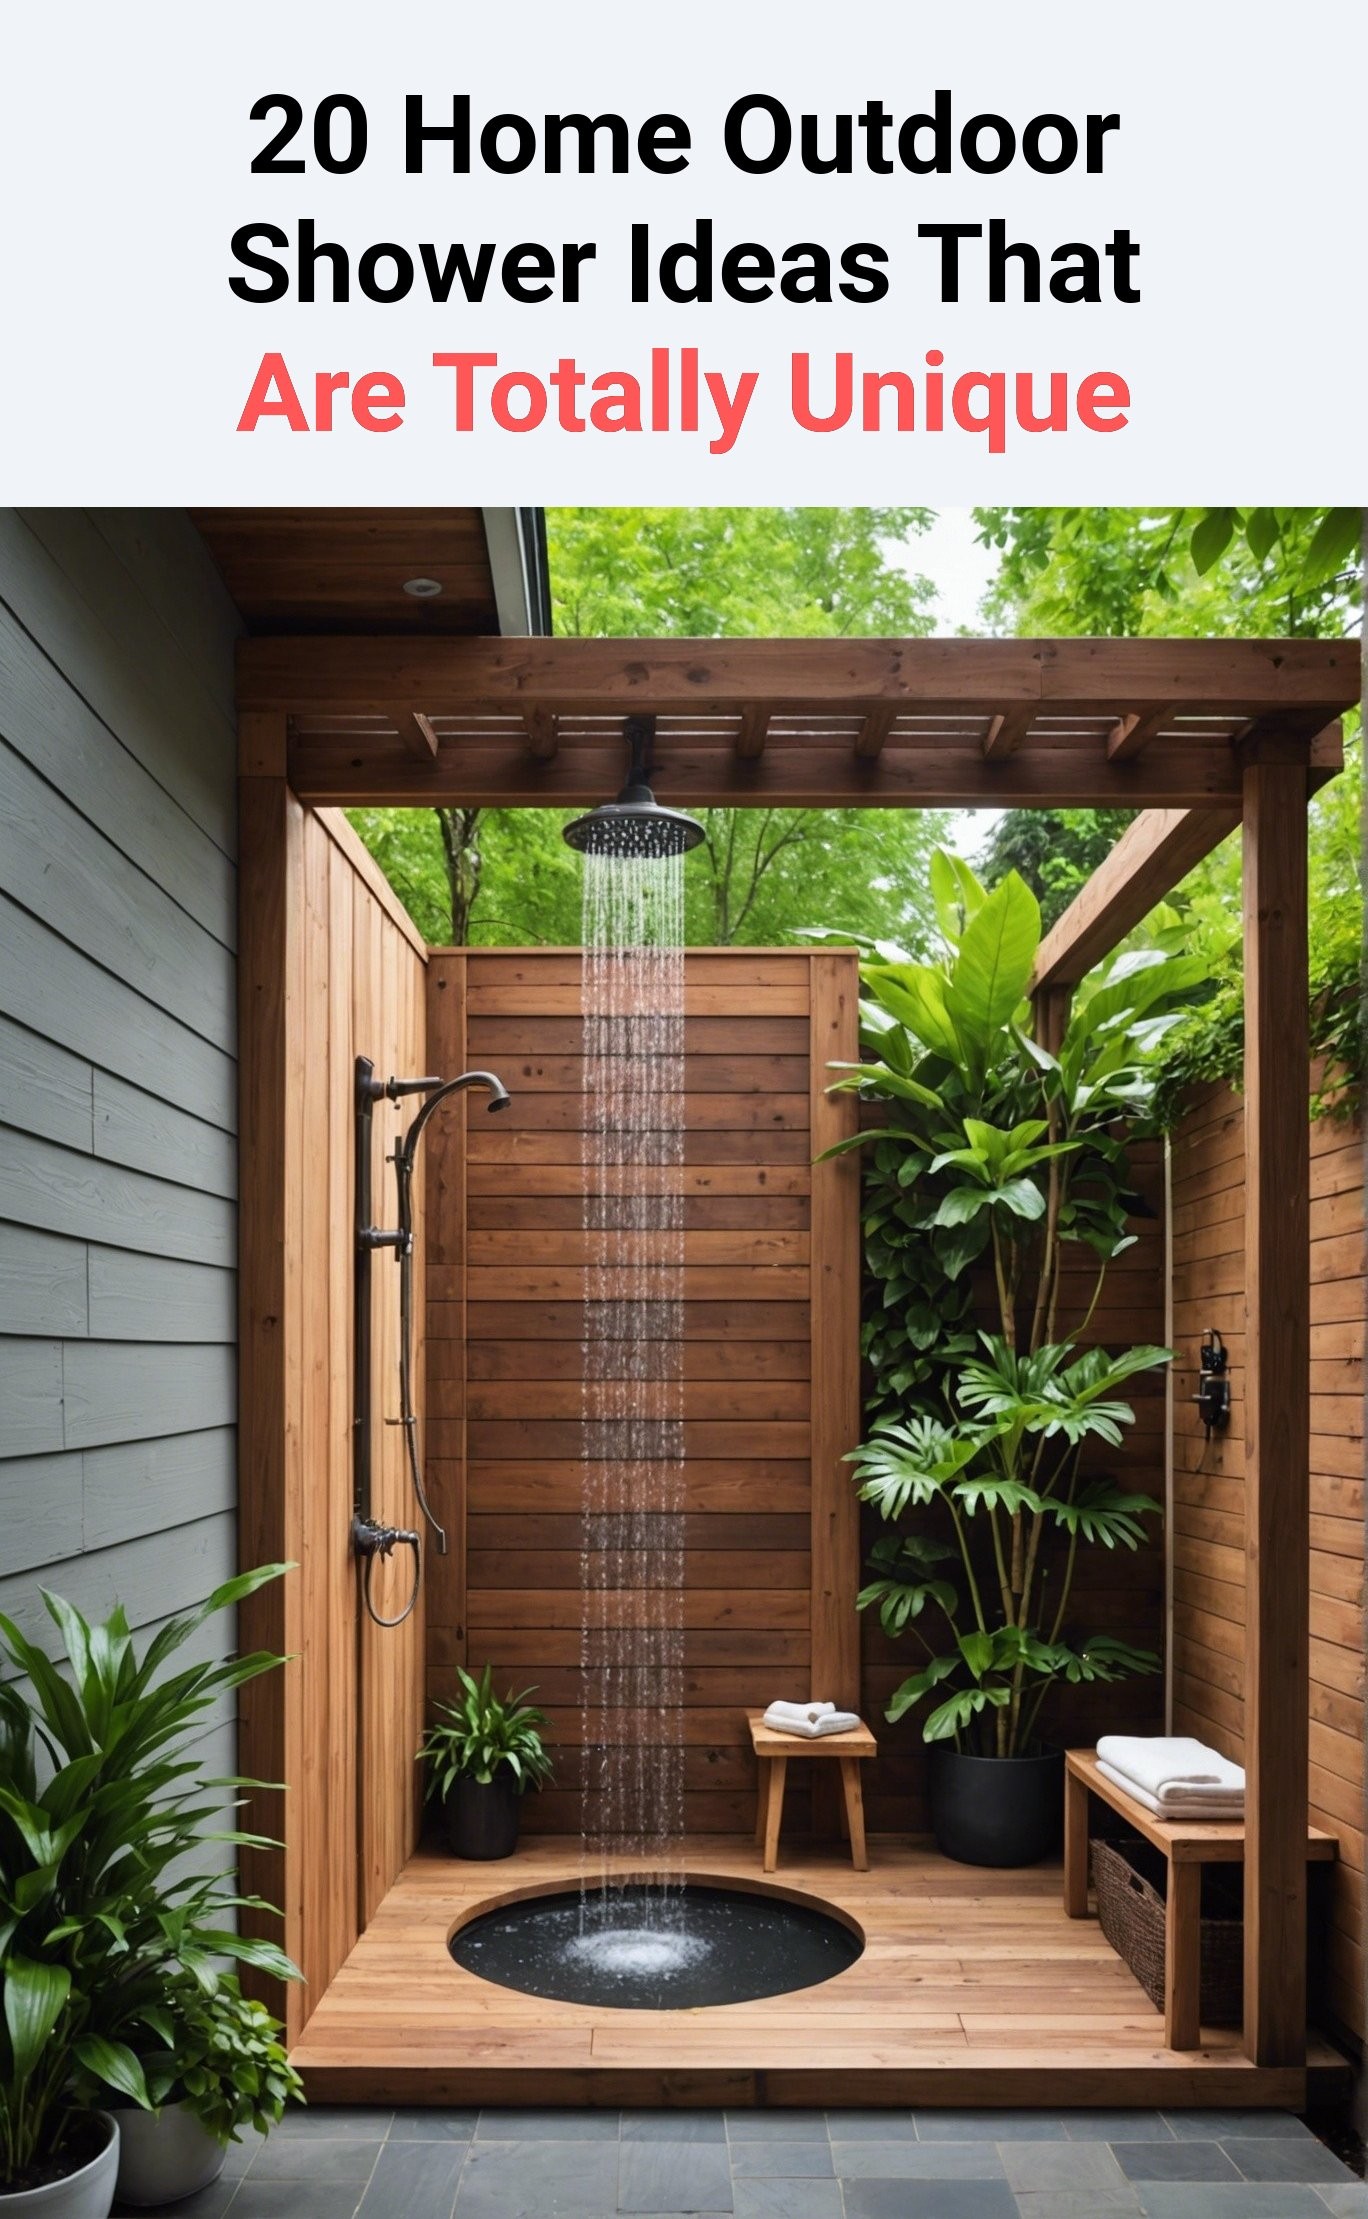 20 Home Outdoor Shower Ideas That Are Totally Unique